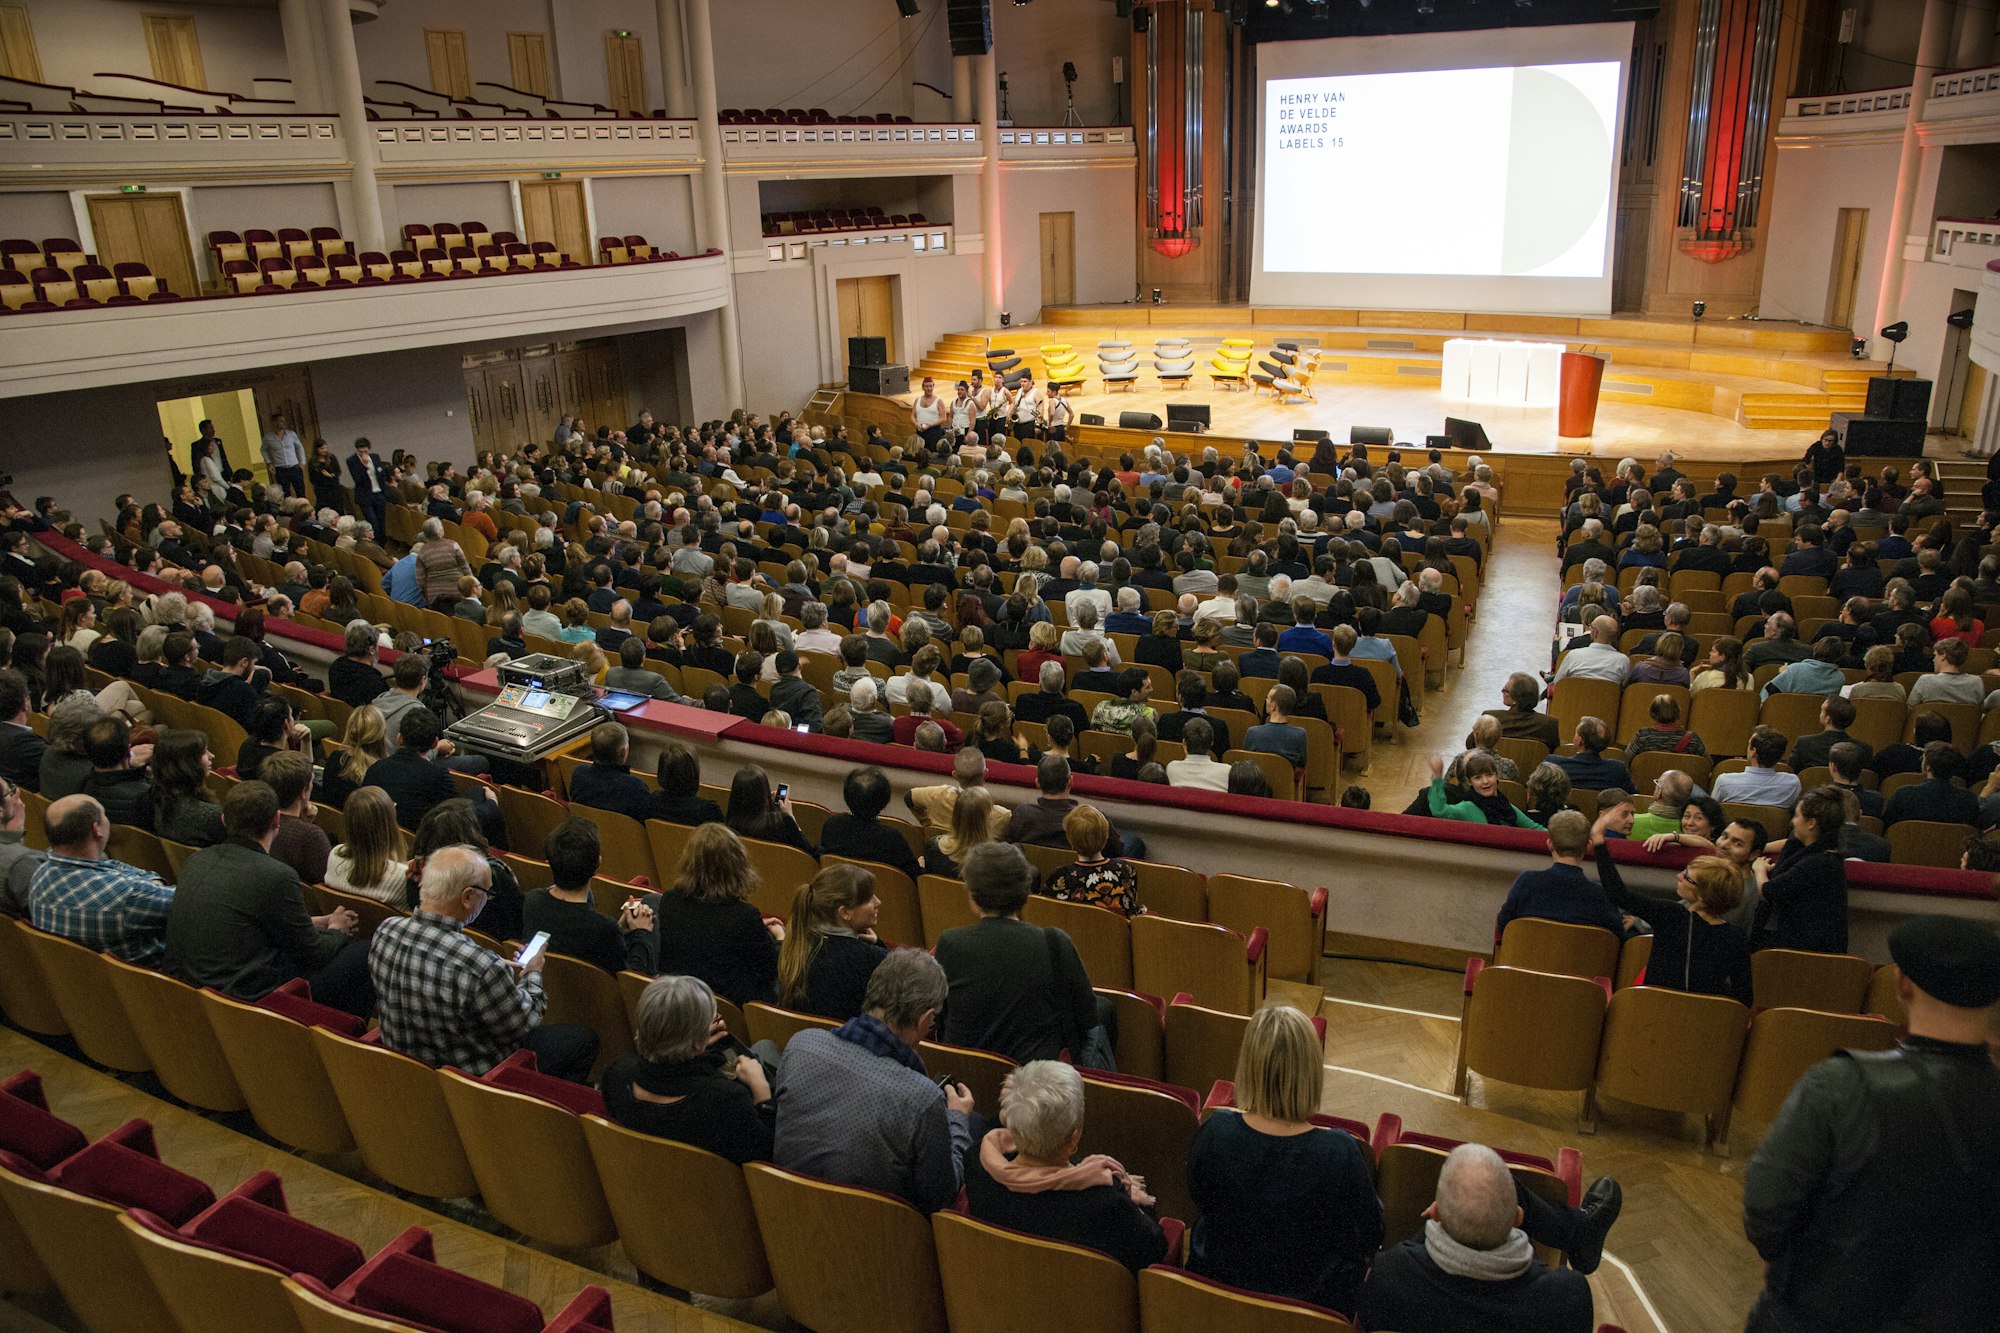 The ceremony in the Henry Le Boeuf hall (Bozar, 2015) © Michael De Lausnay